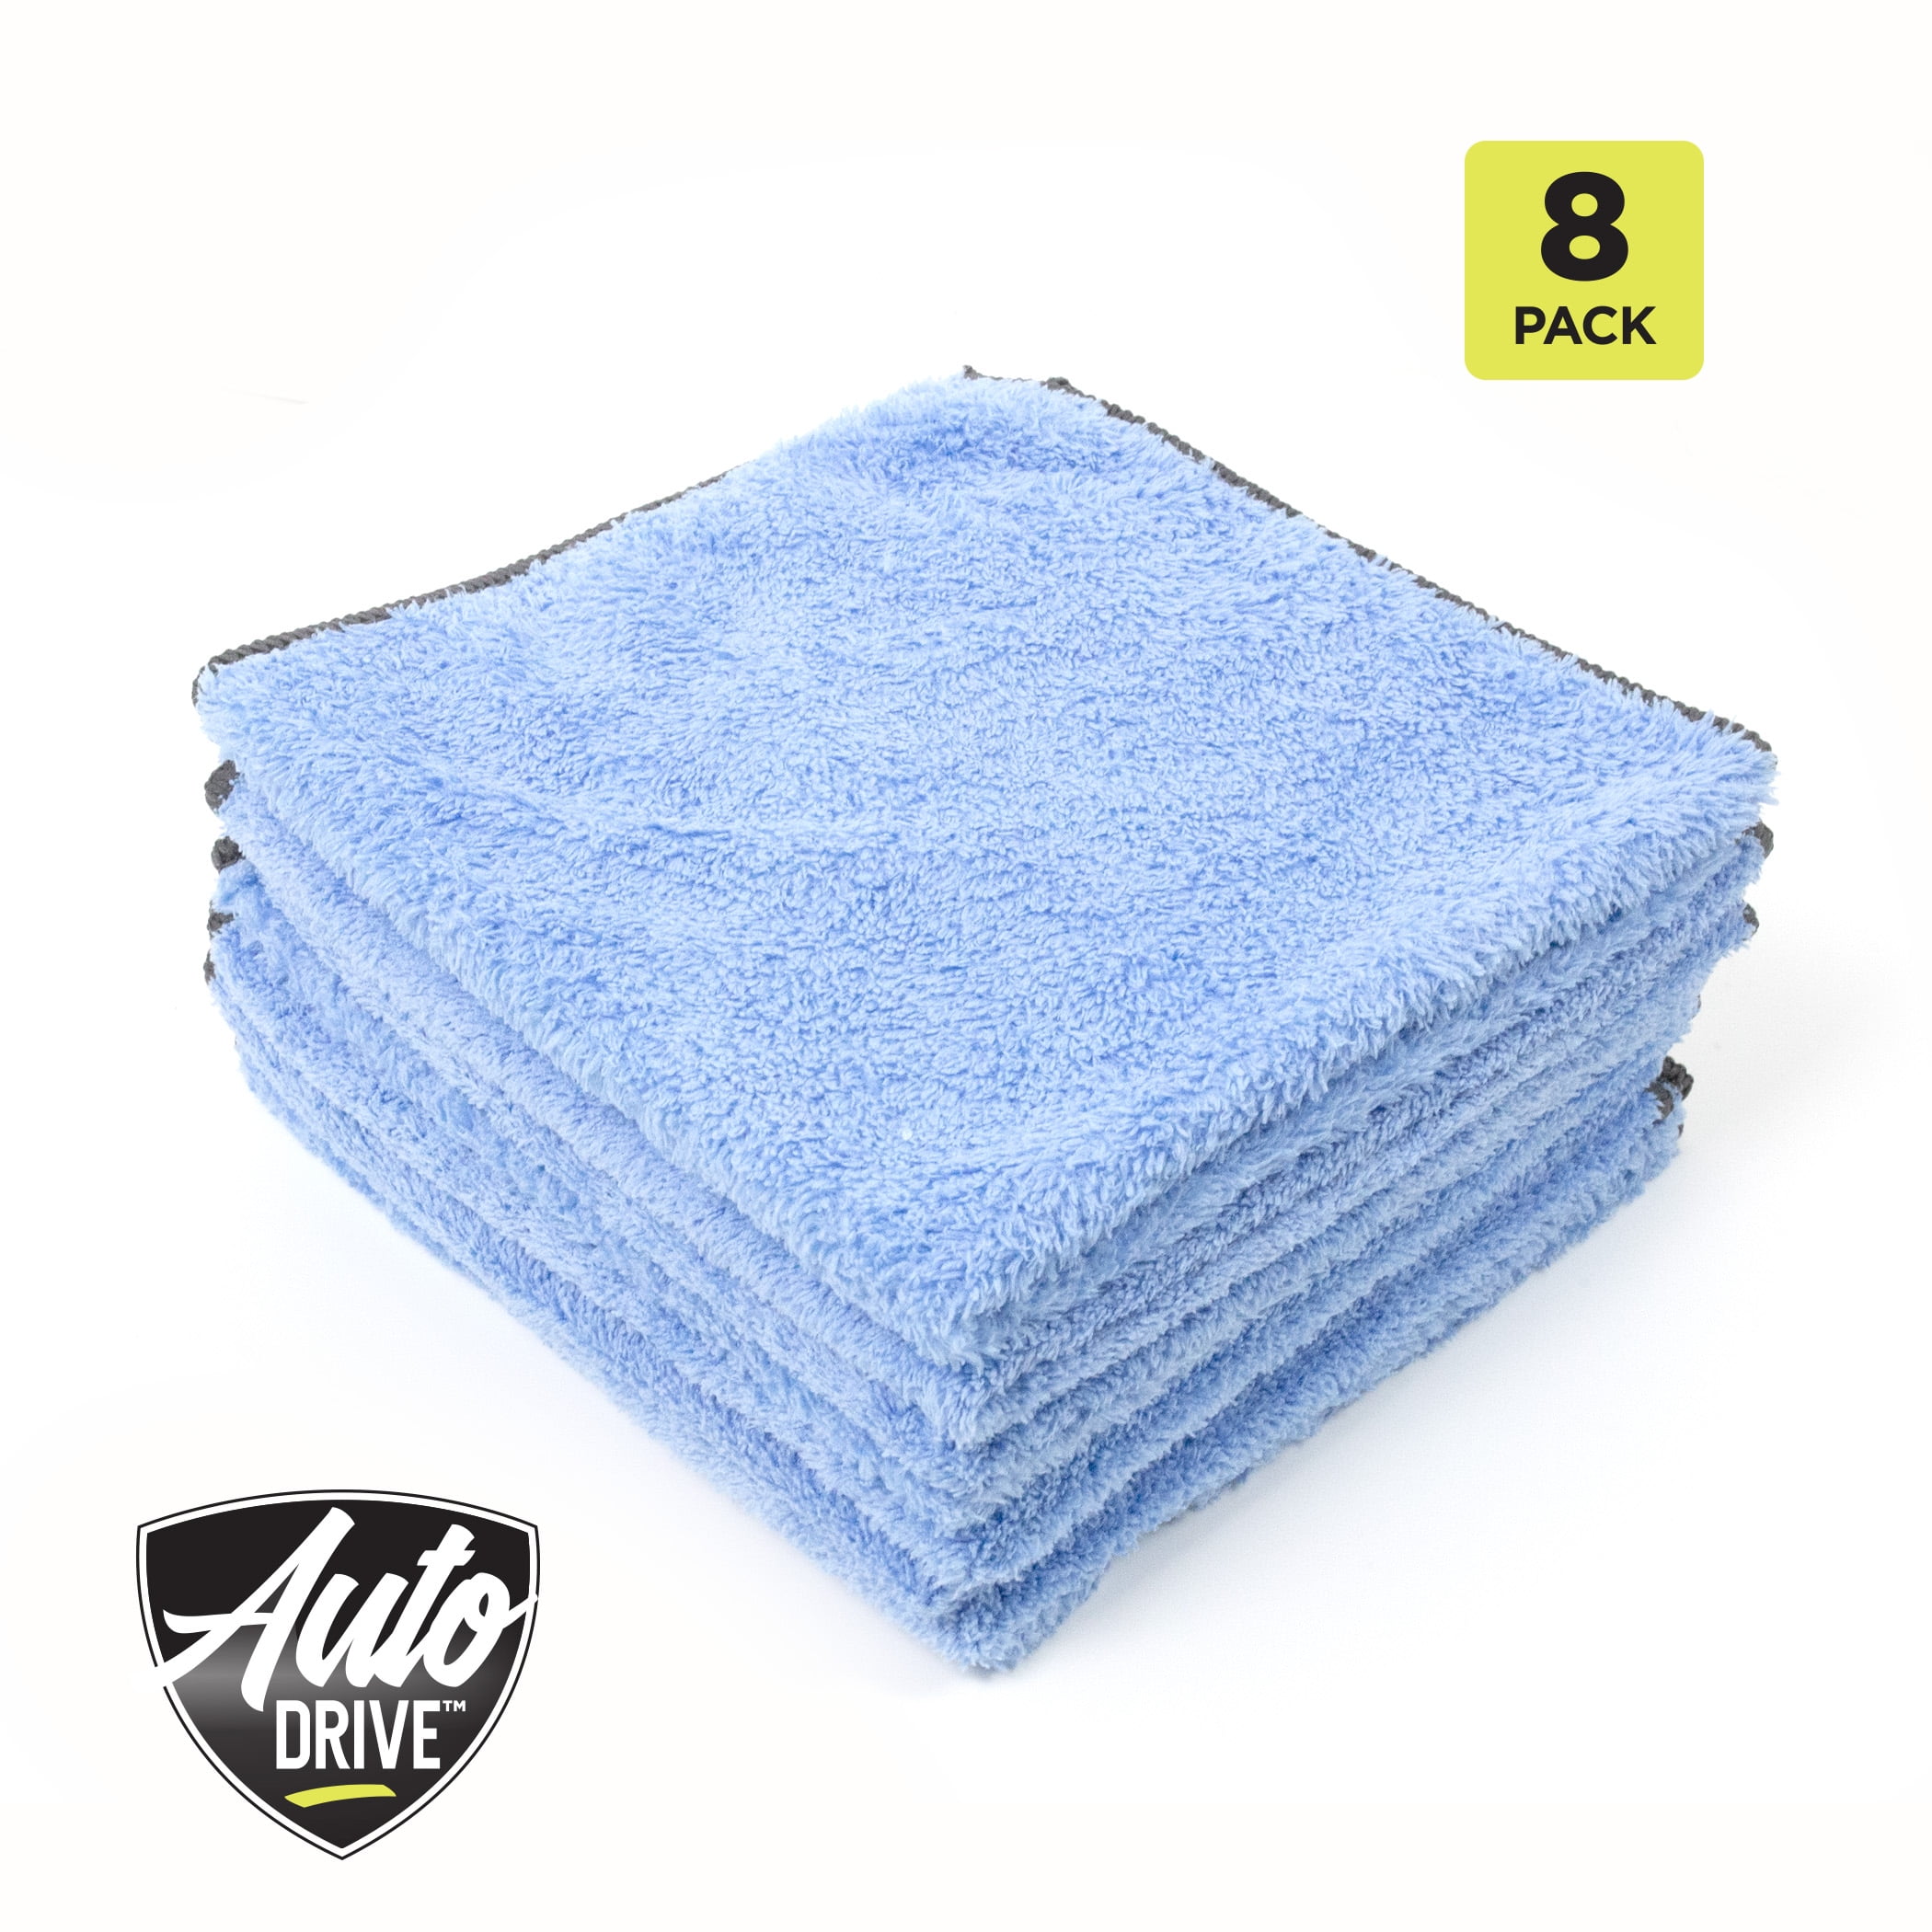 Disposable Microfiber Flat Mops-SmartPads-Case of 8 Boxes - Texon Athletic  Towel